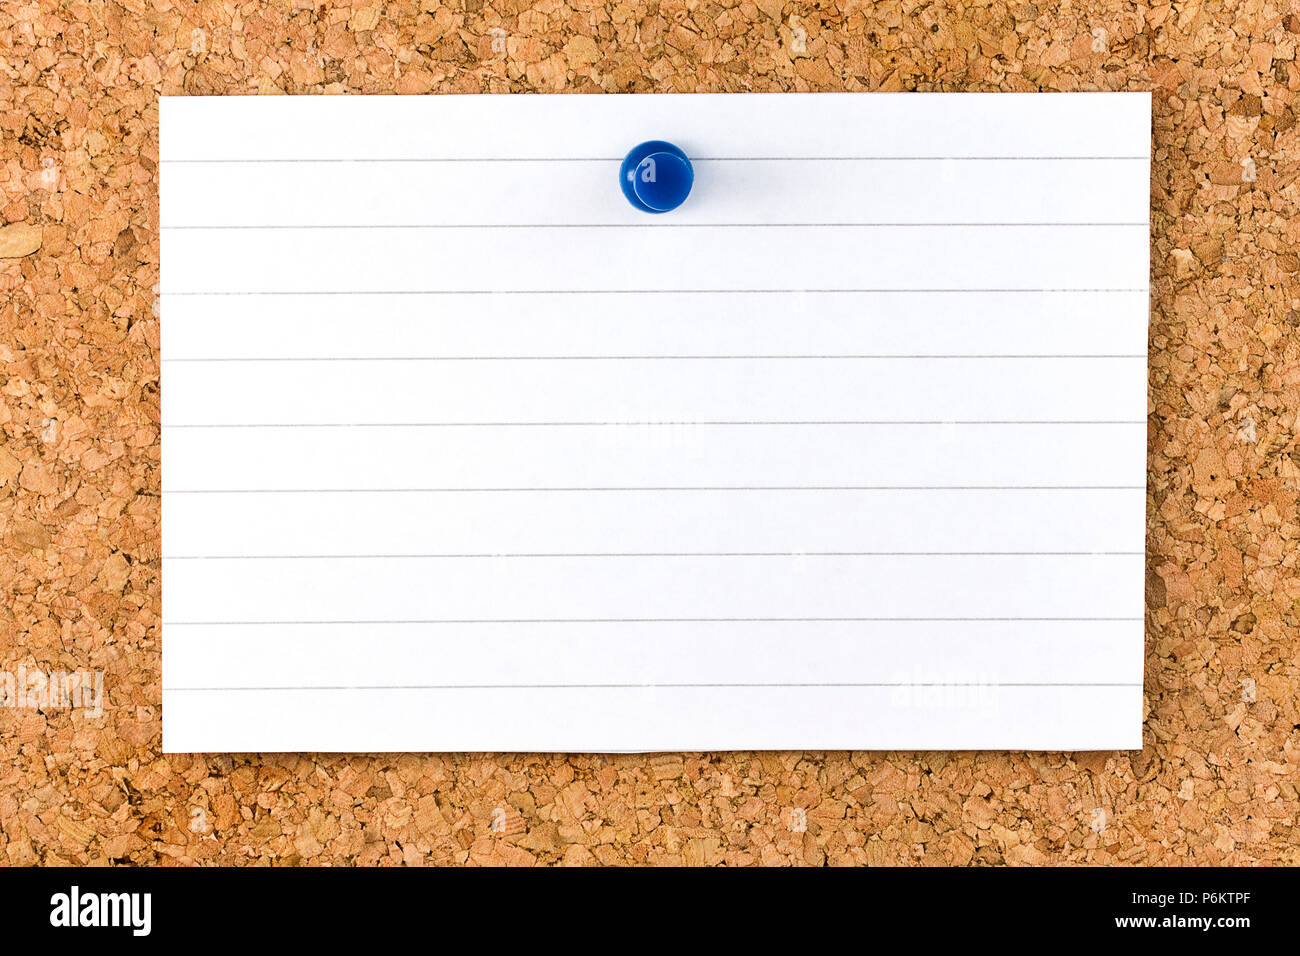 Horizontal Blank white striped sheet fixed on cork board with a blue small thumb tack Stock Photo